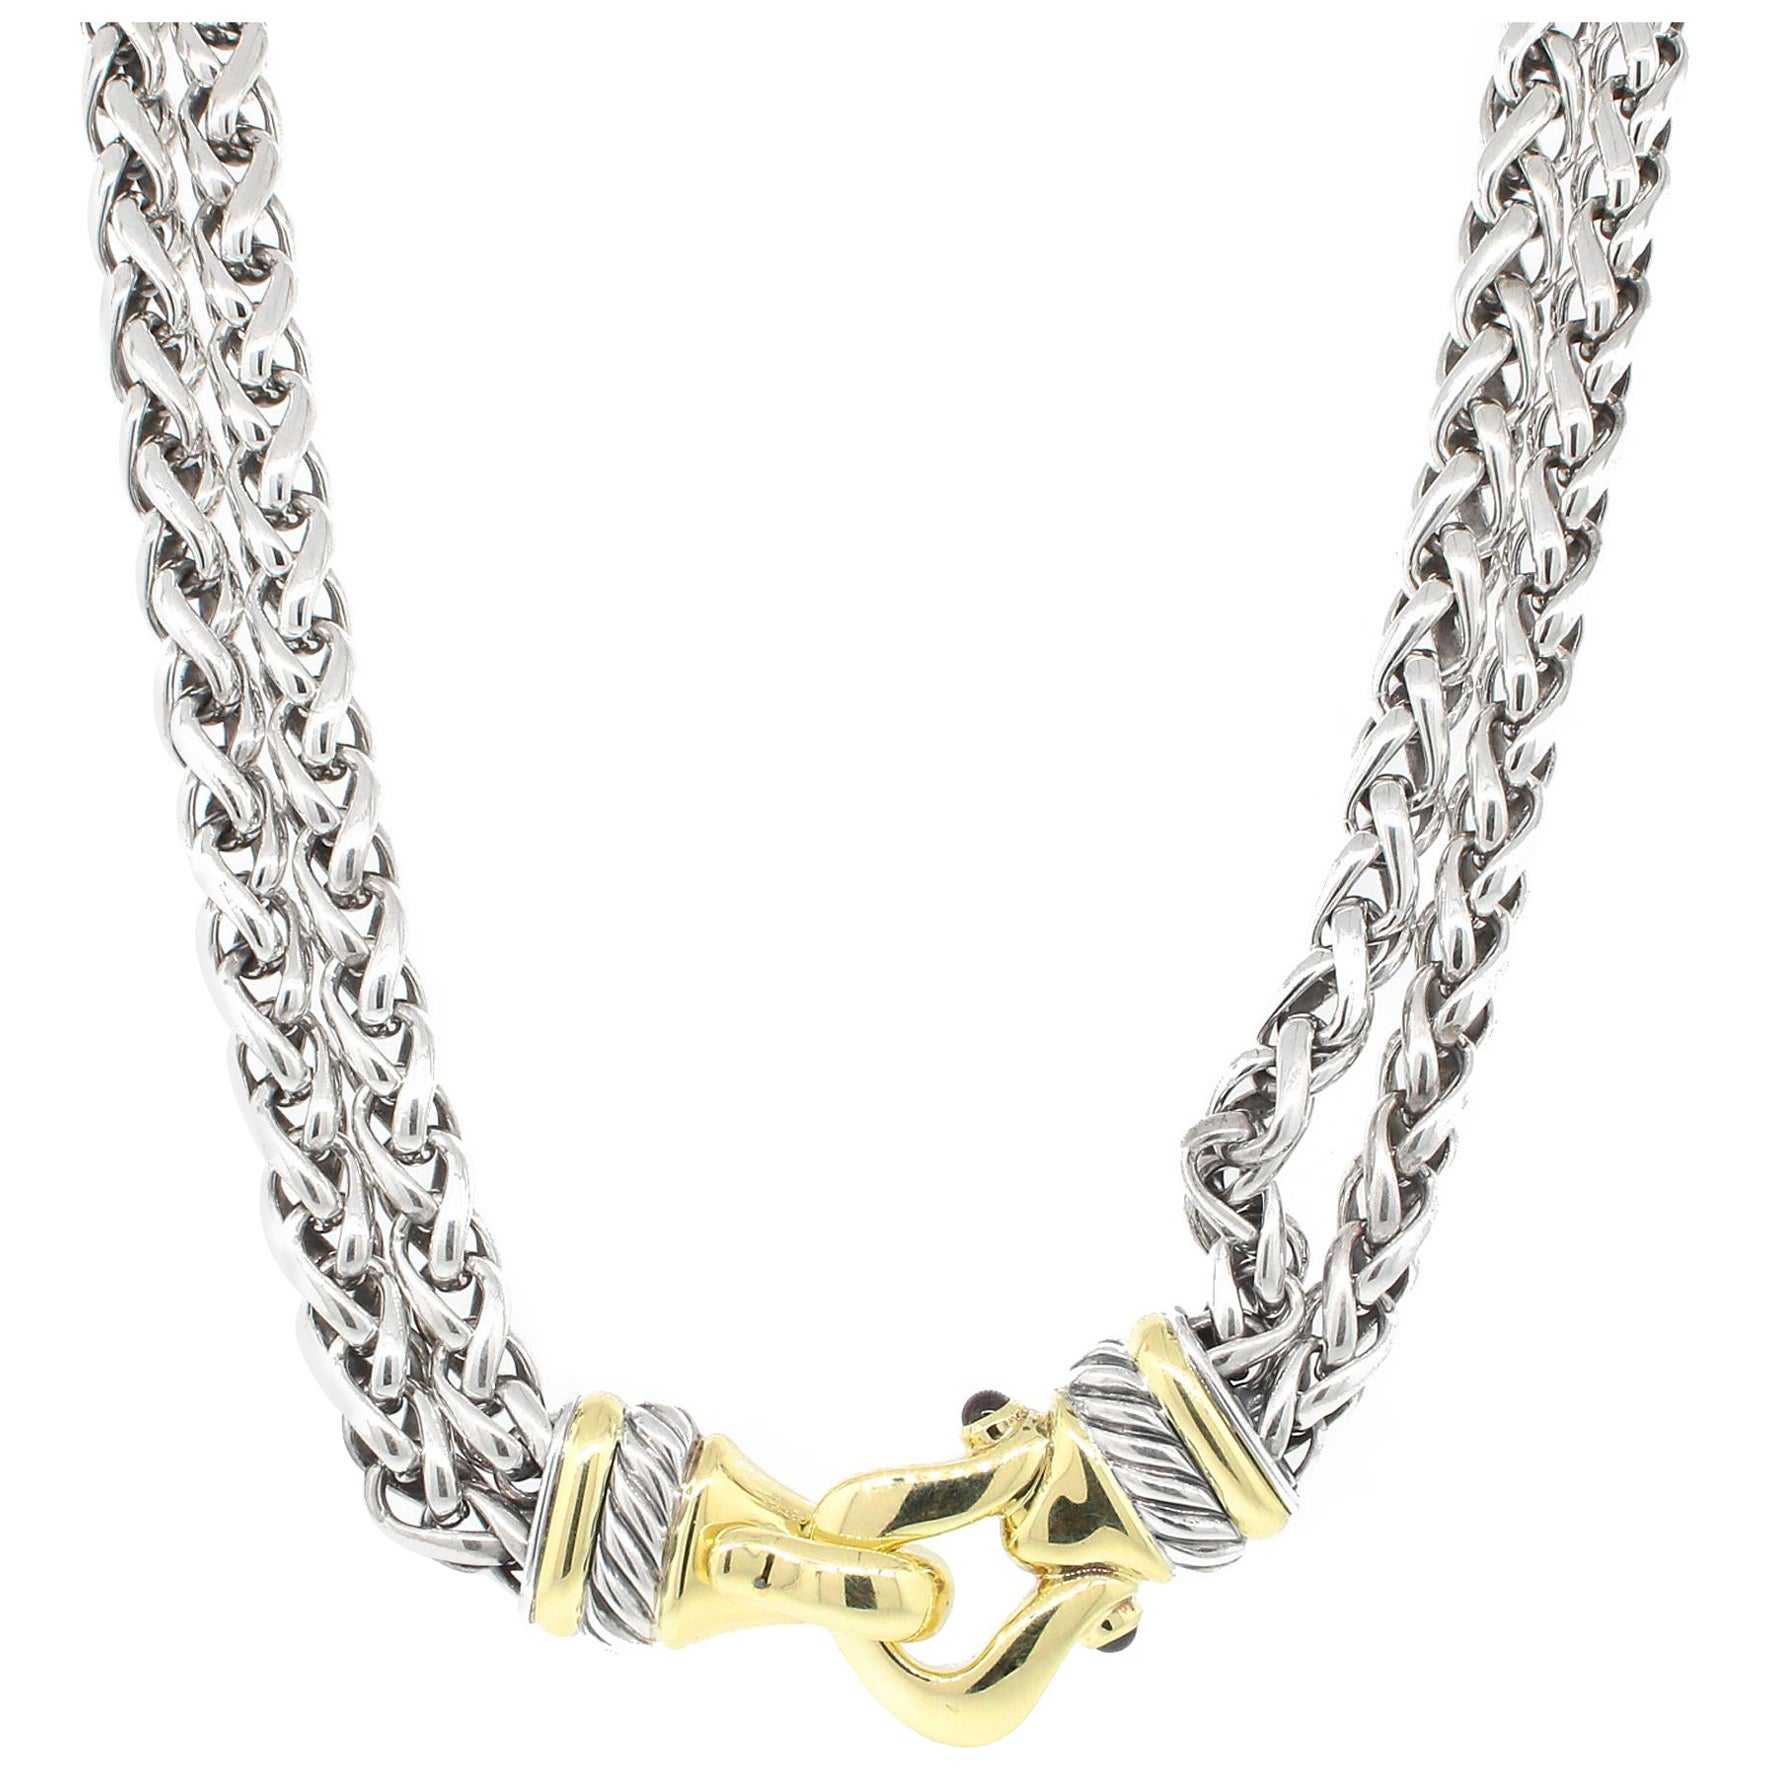 David Yurman Silver and Solid 14 karat Gold Double Wheat Chain Buckle Necklace